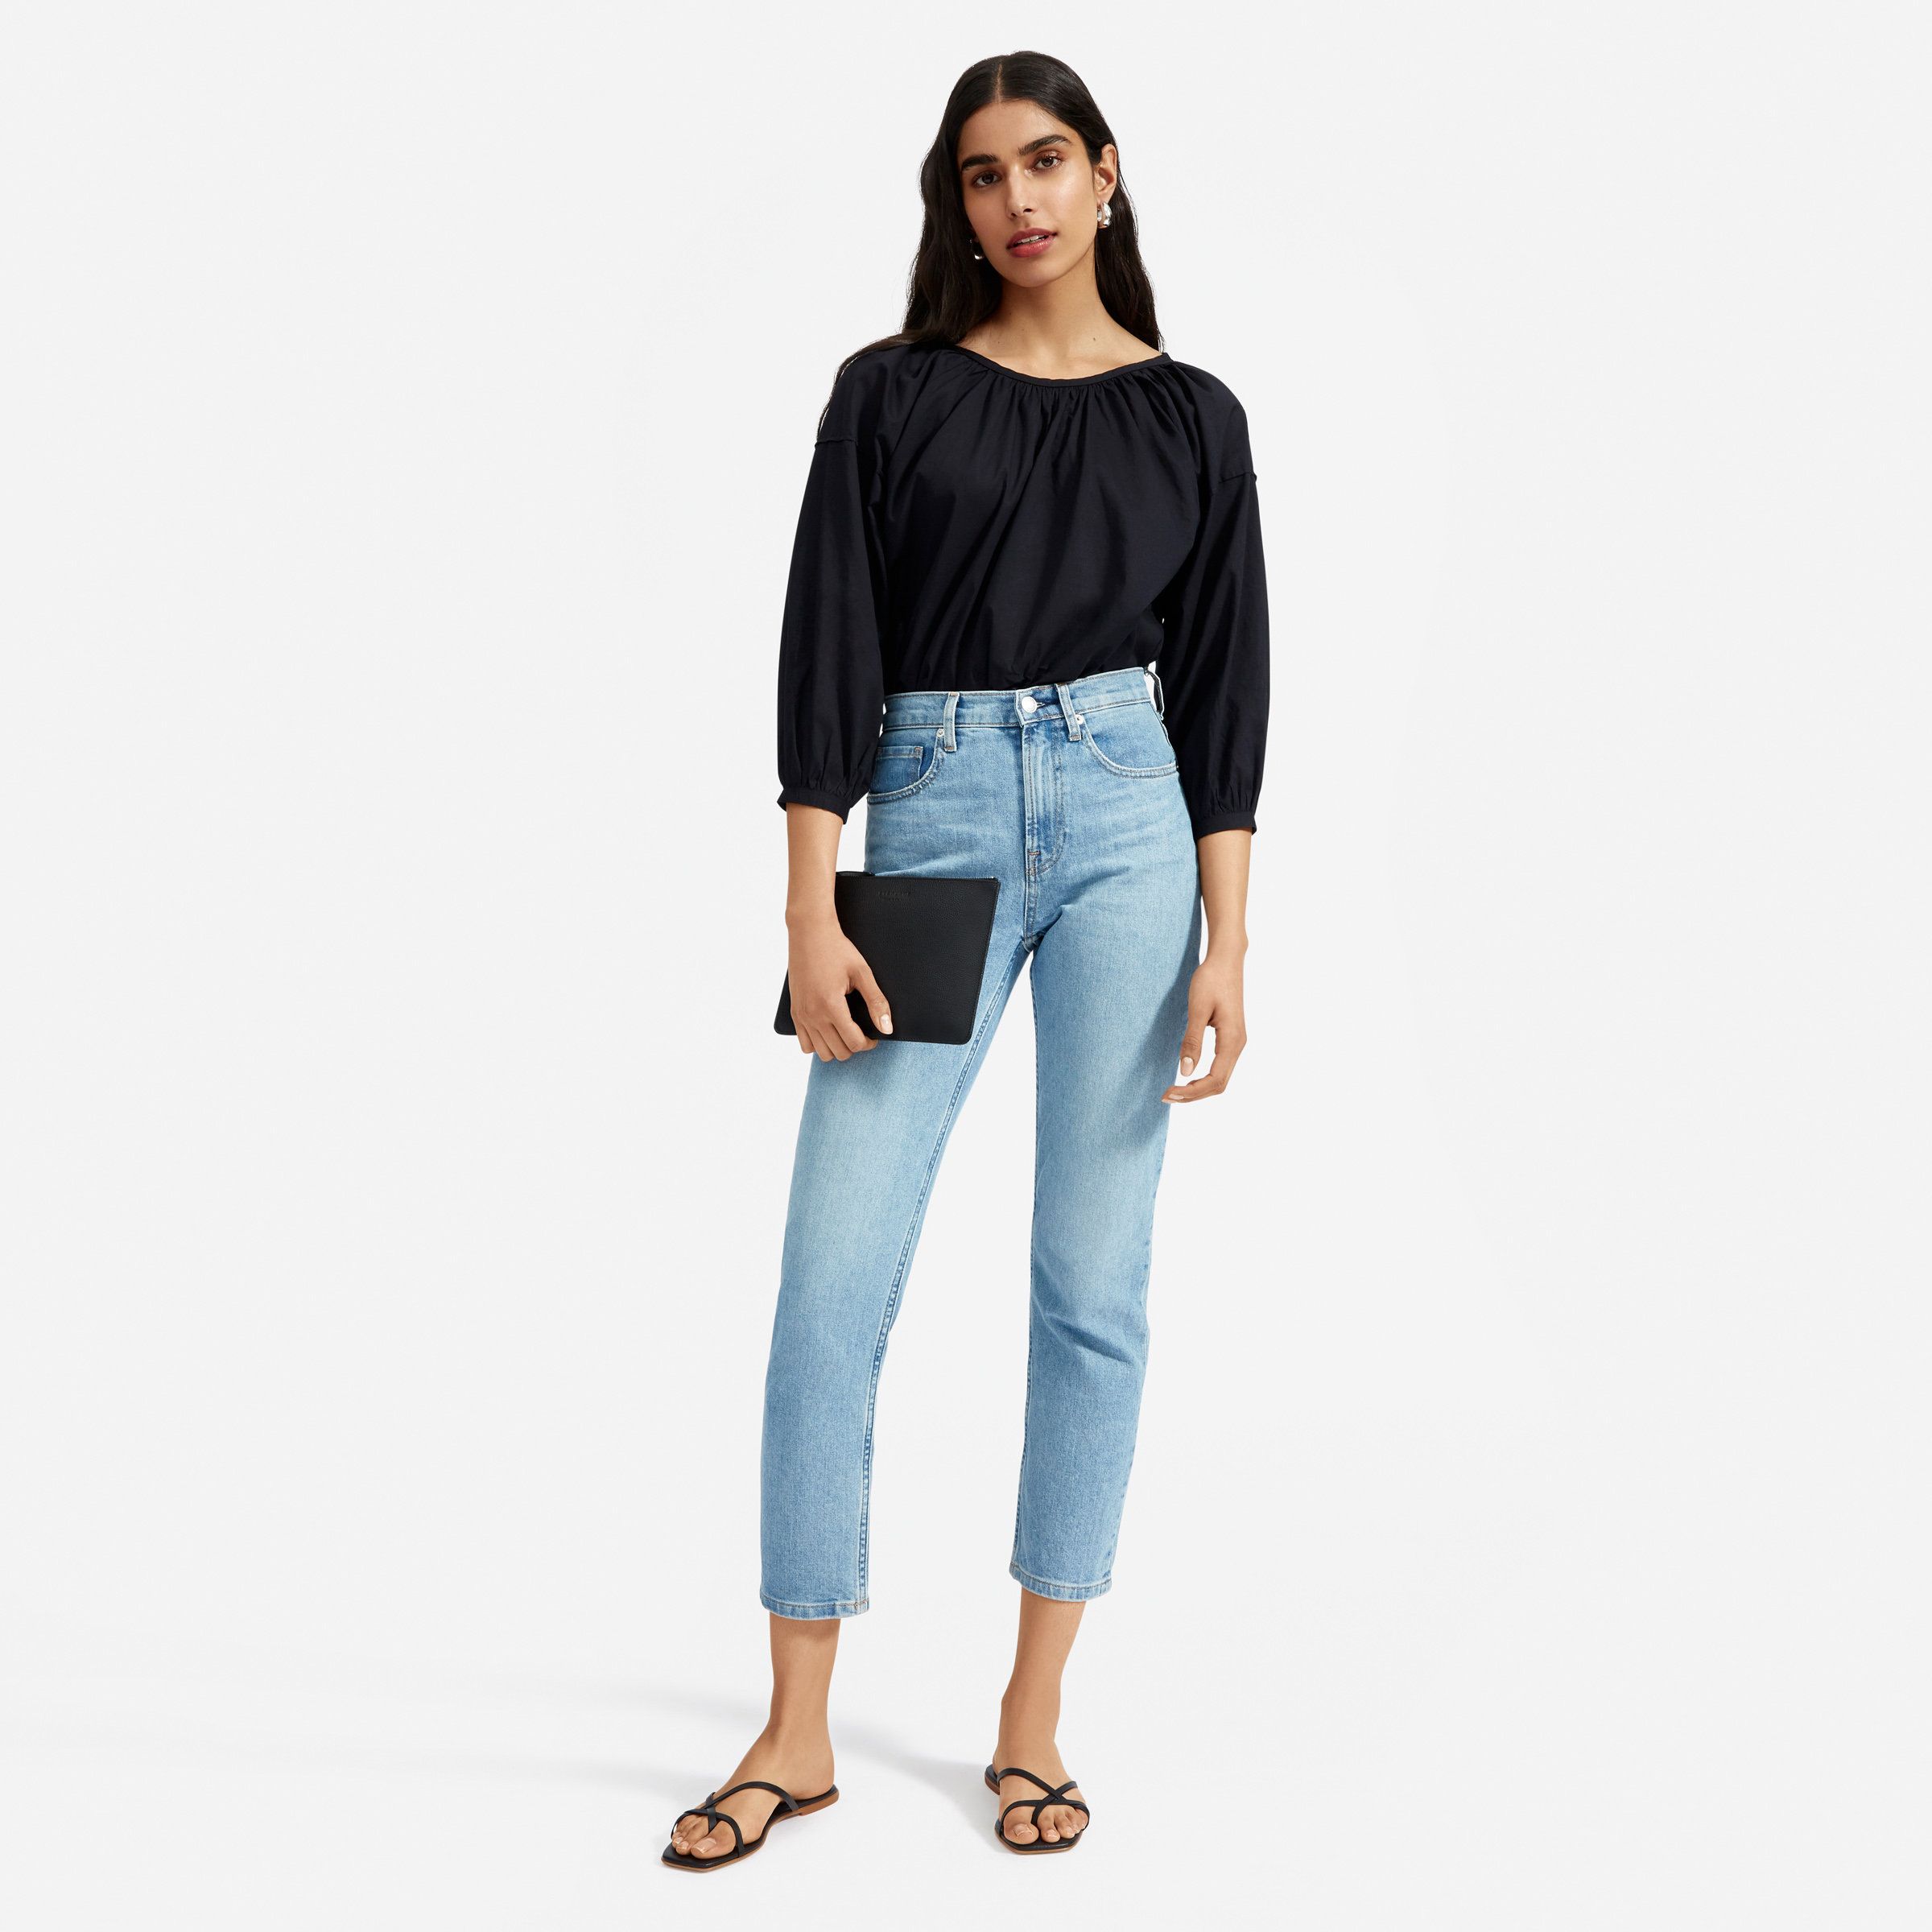 The Air Ruched Blouse | Everlane